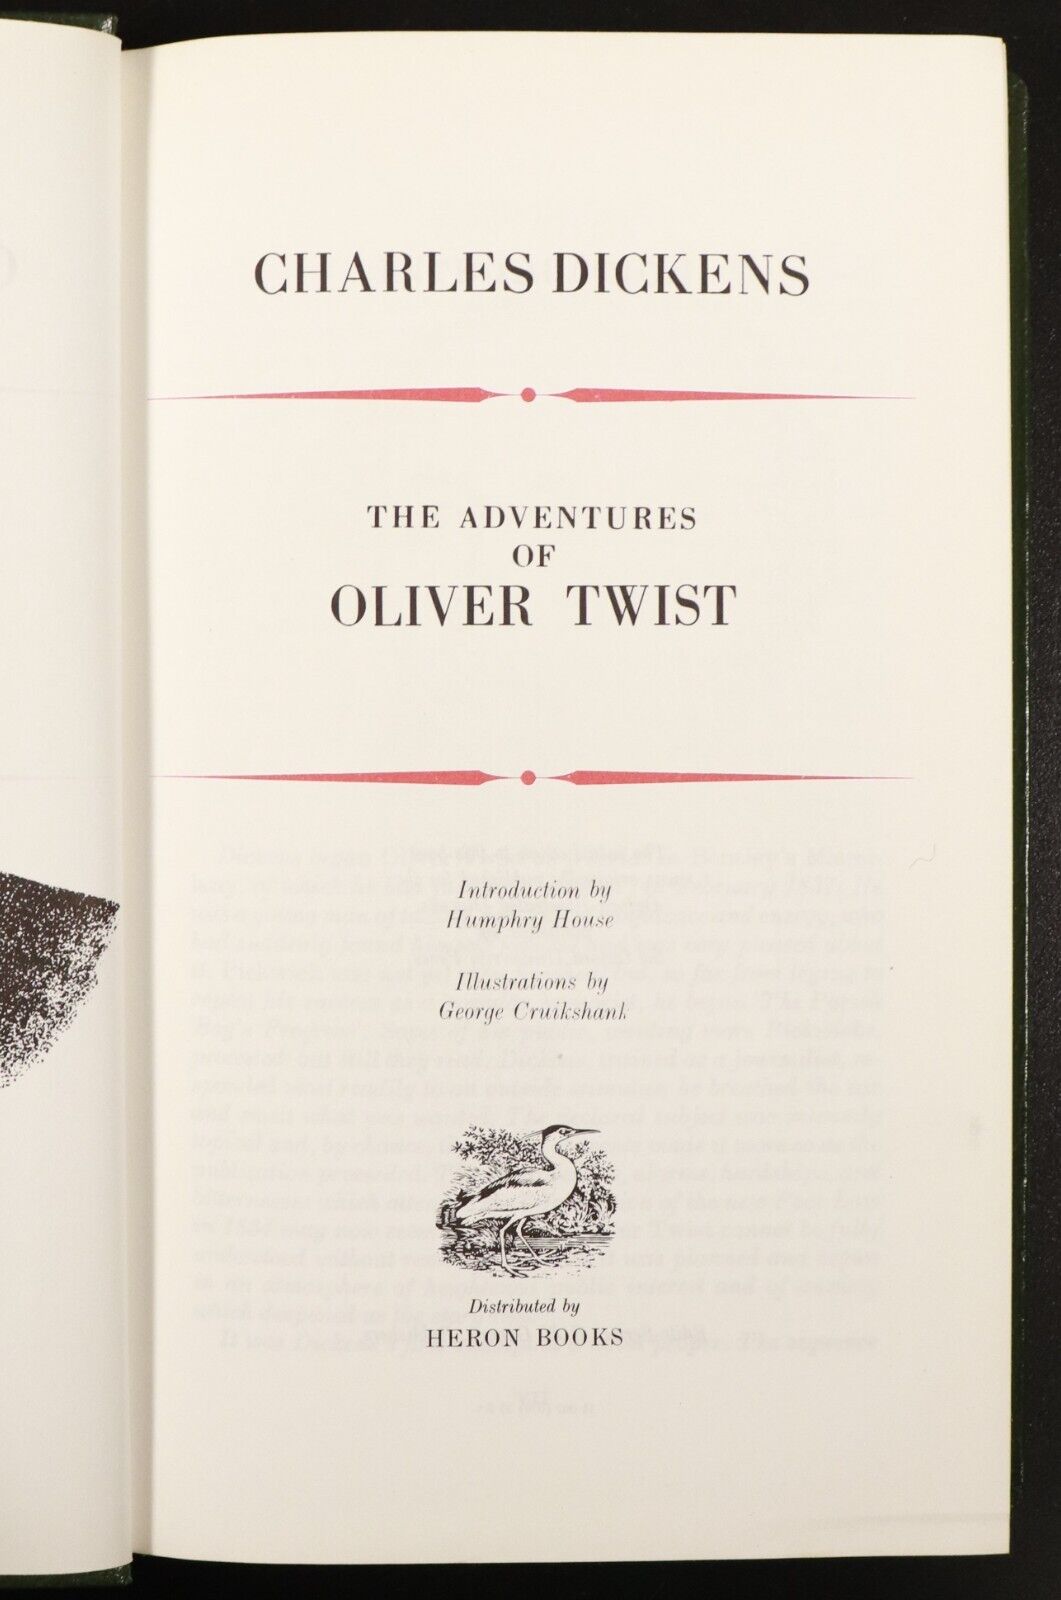 1970 3vol Copperfield & Oliver Twist by Charles Dickens Vintage Fiction Books